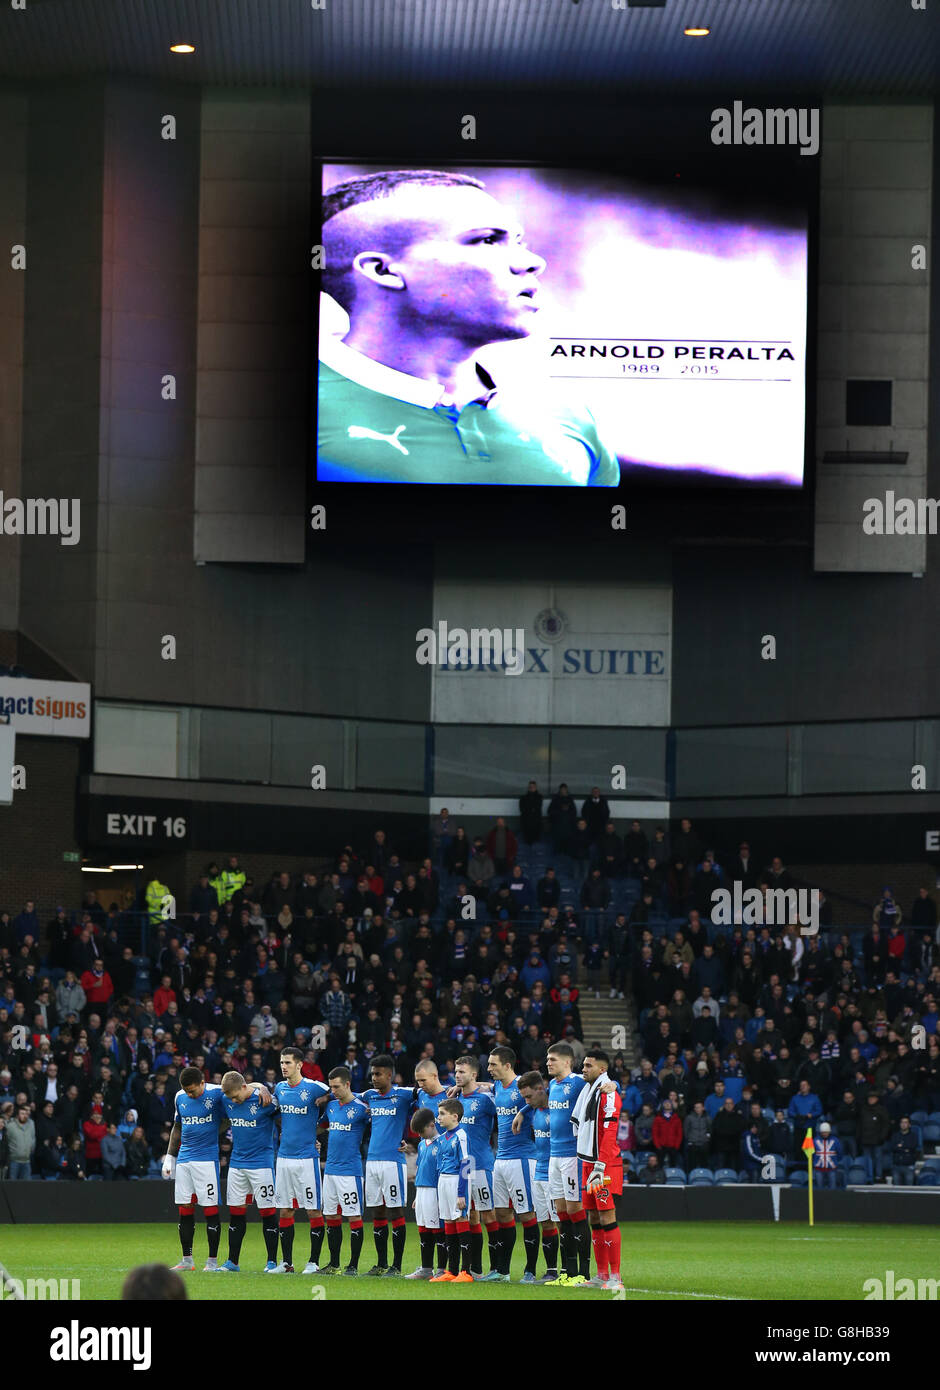 A minutes silence is held after the death of former Rangers player Arnold Peralta before the Ladbrokes Scottish Championship match at the Ibrox Stadium, Glasgow. Stock Photo